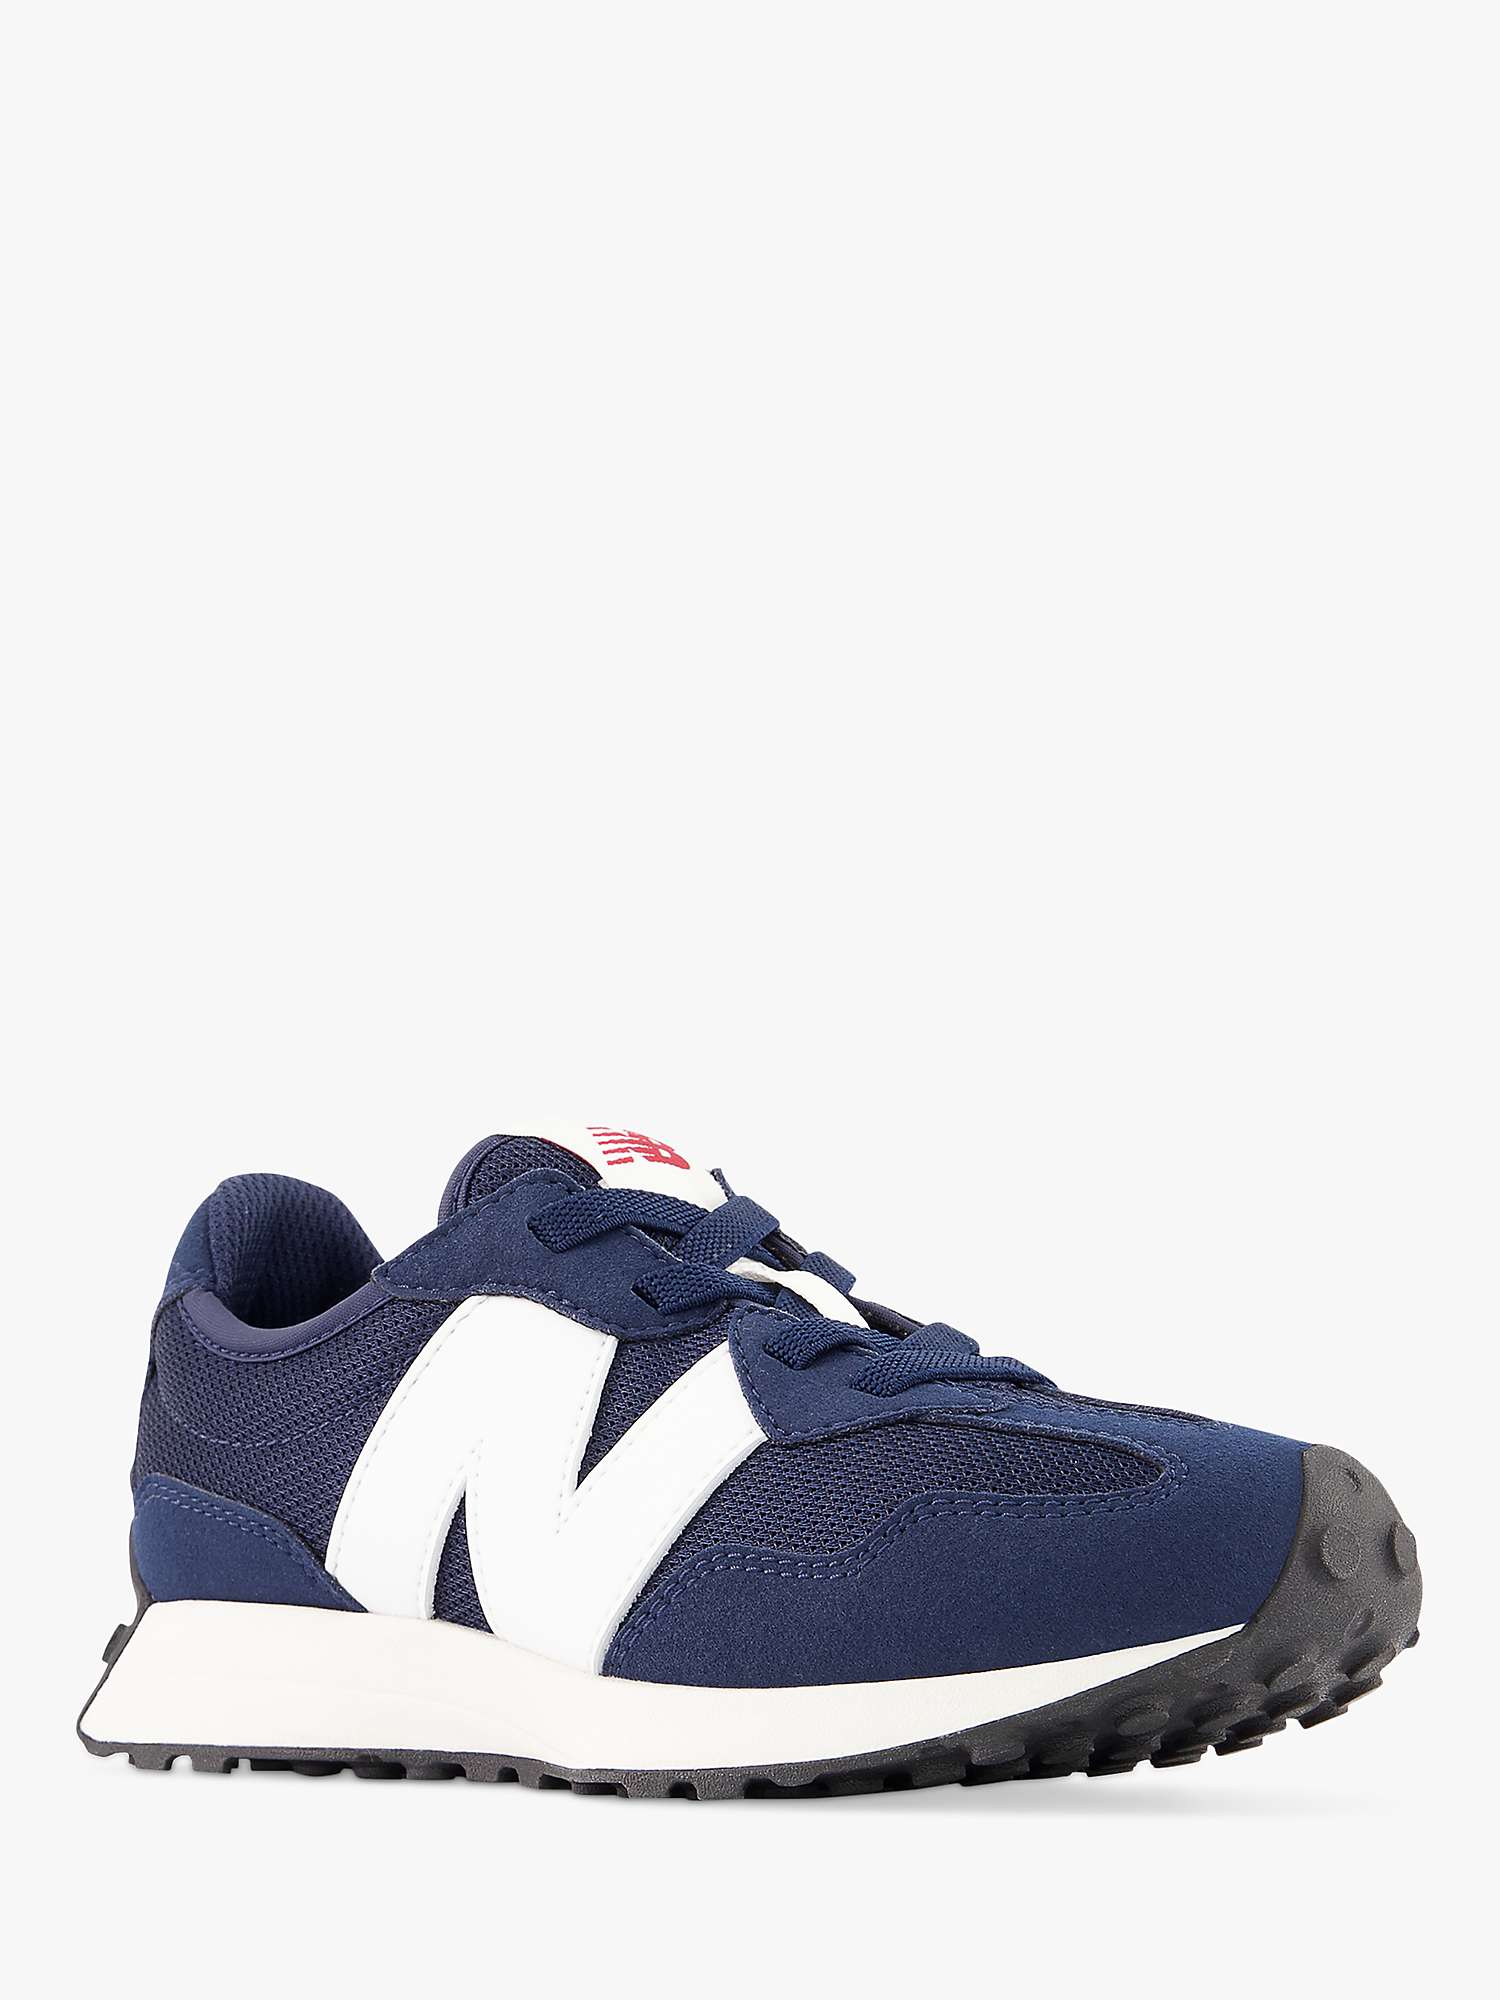 Buy New Balance Kids' 327 Bungee Lace Trainers, Navy Online at johnlewis.com